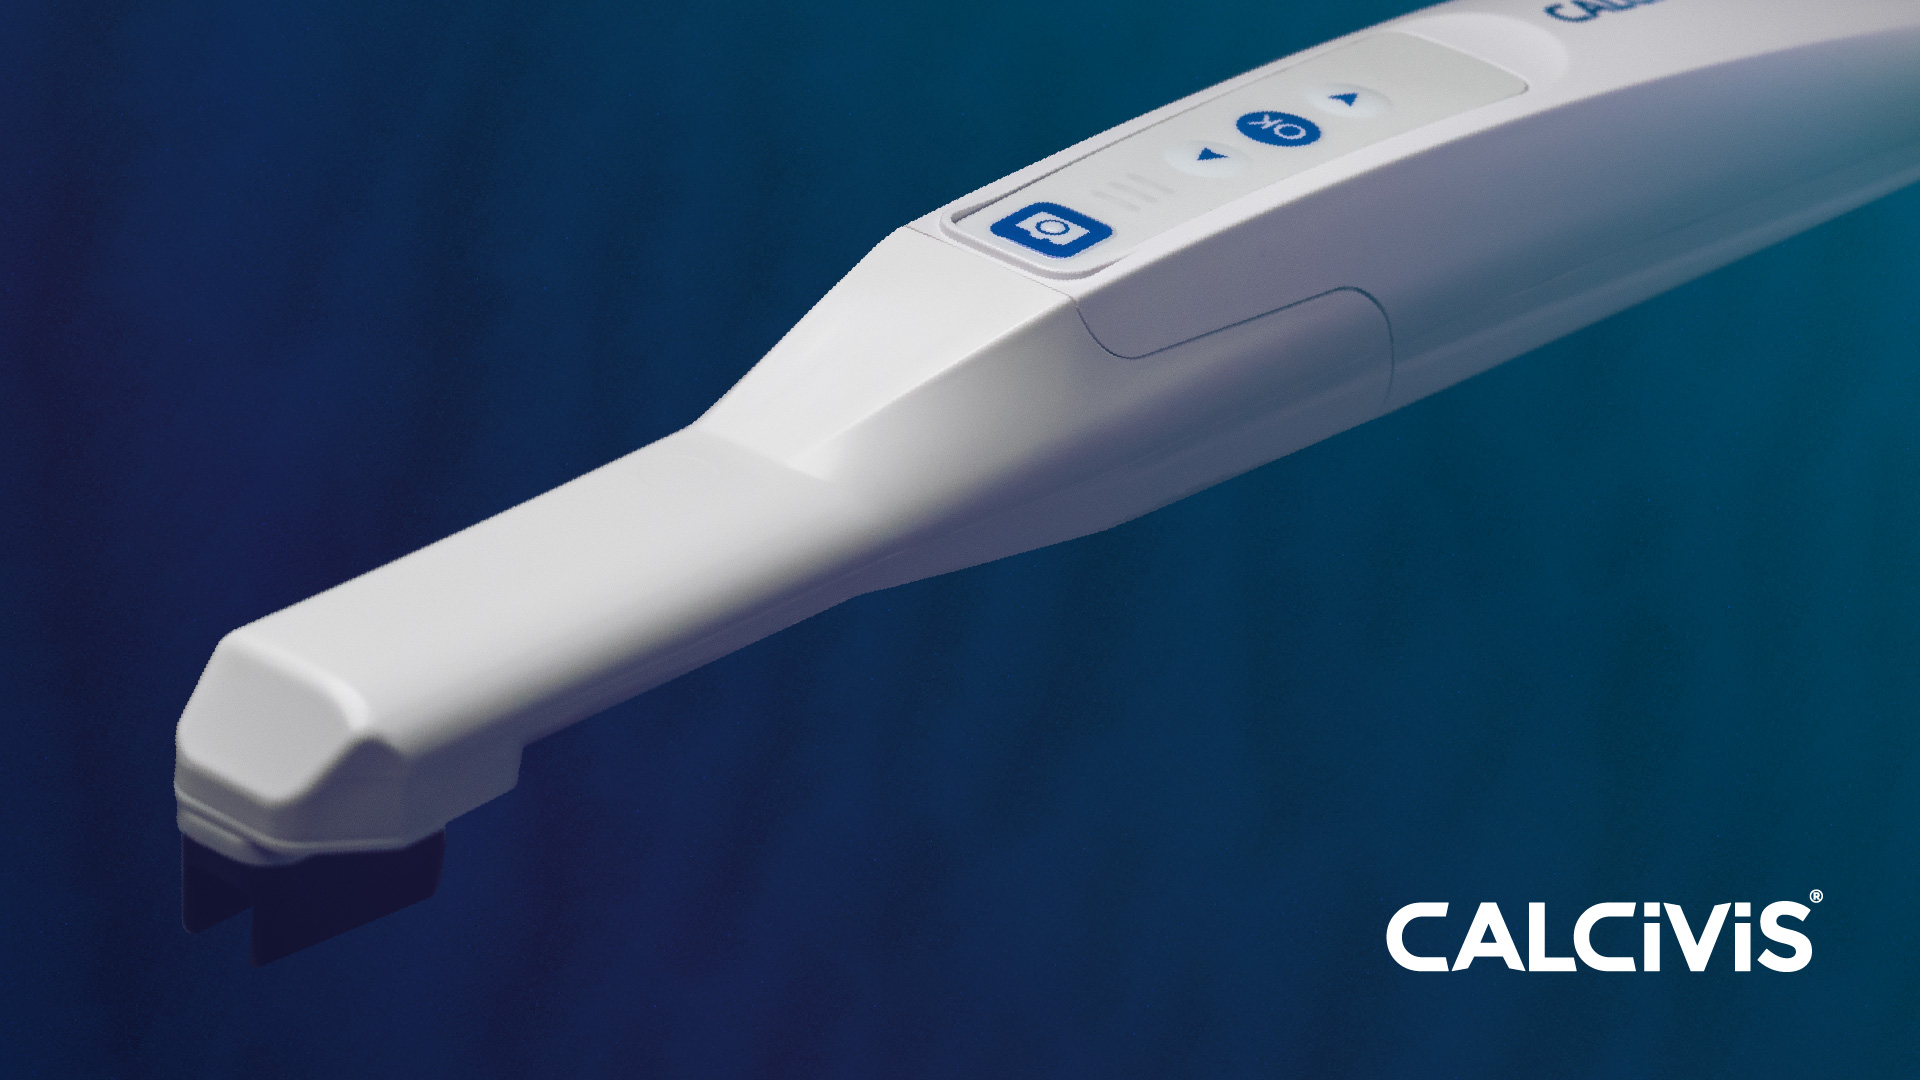 CALCIVIS® to Launch Revolutionary New Bioluminescent Dental Imaging System in the US After Securing Final Stage Food and Drug Administration Pre-Market Approval (PMA)